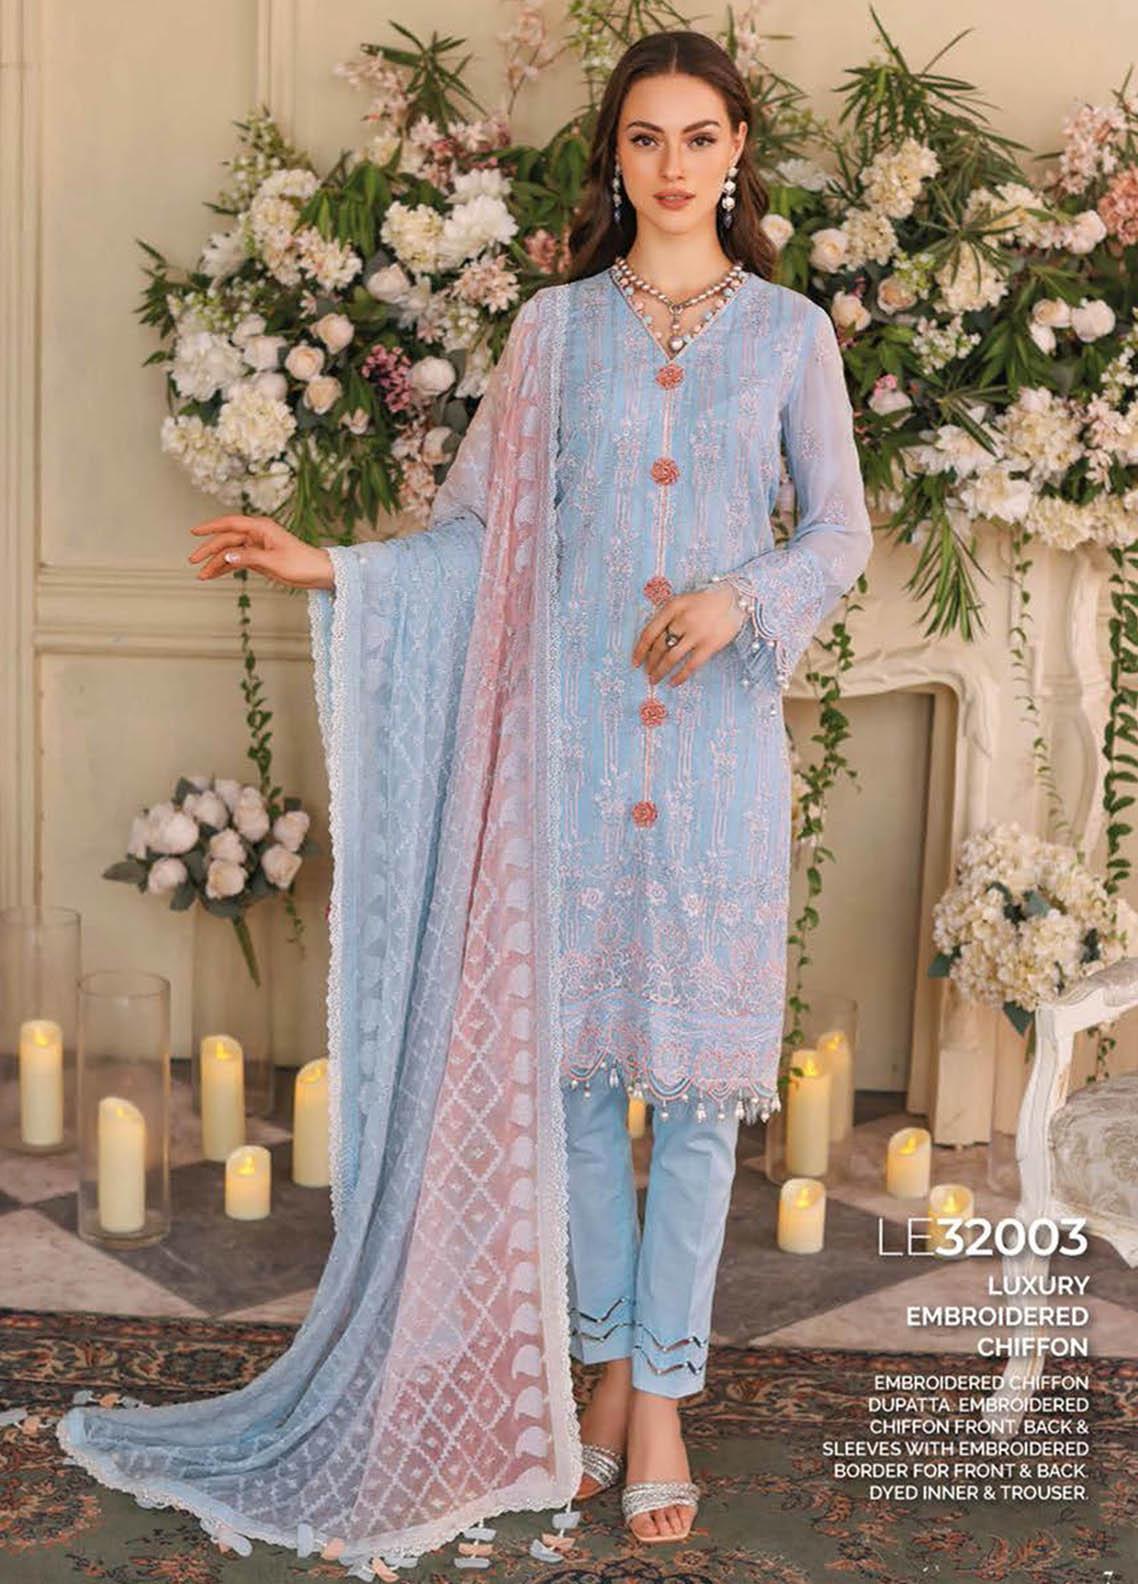 Gul Ahmed 3PC Embroidered Chiffon Unstitched Suit LE-32003